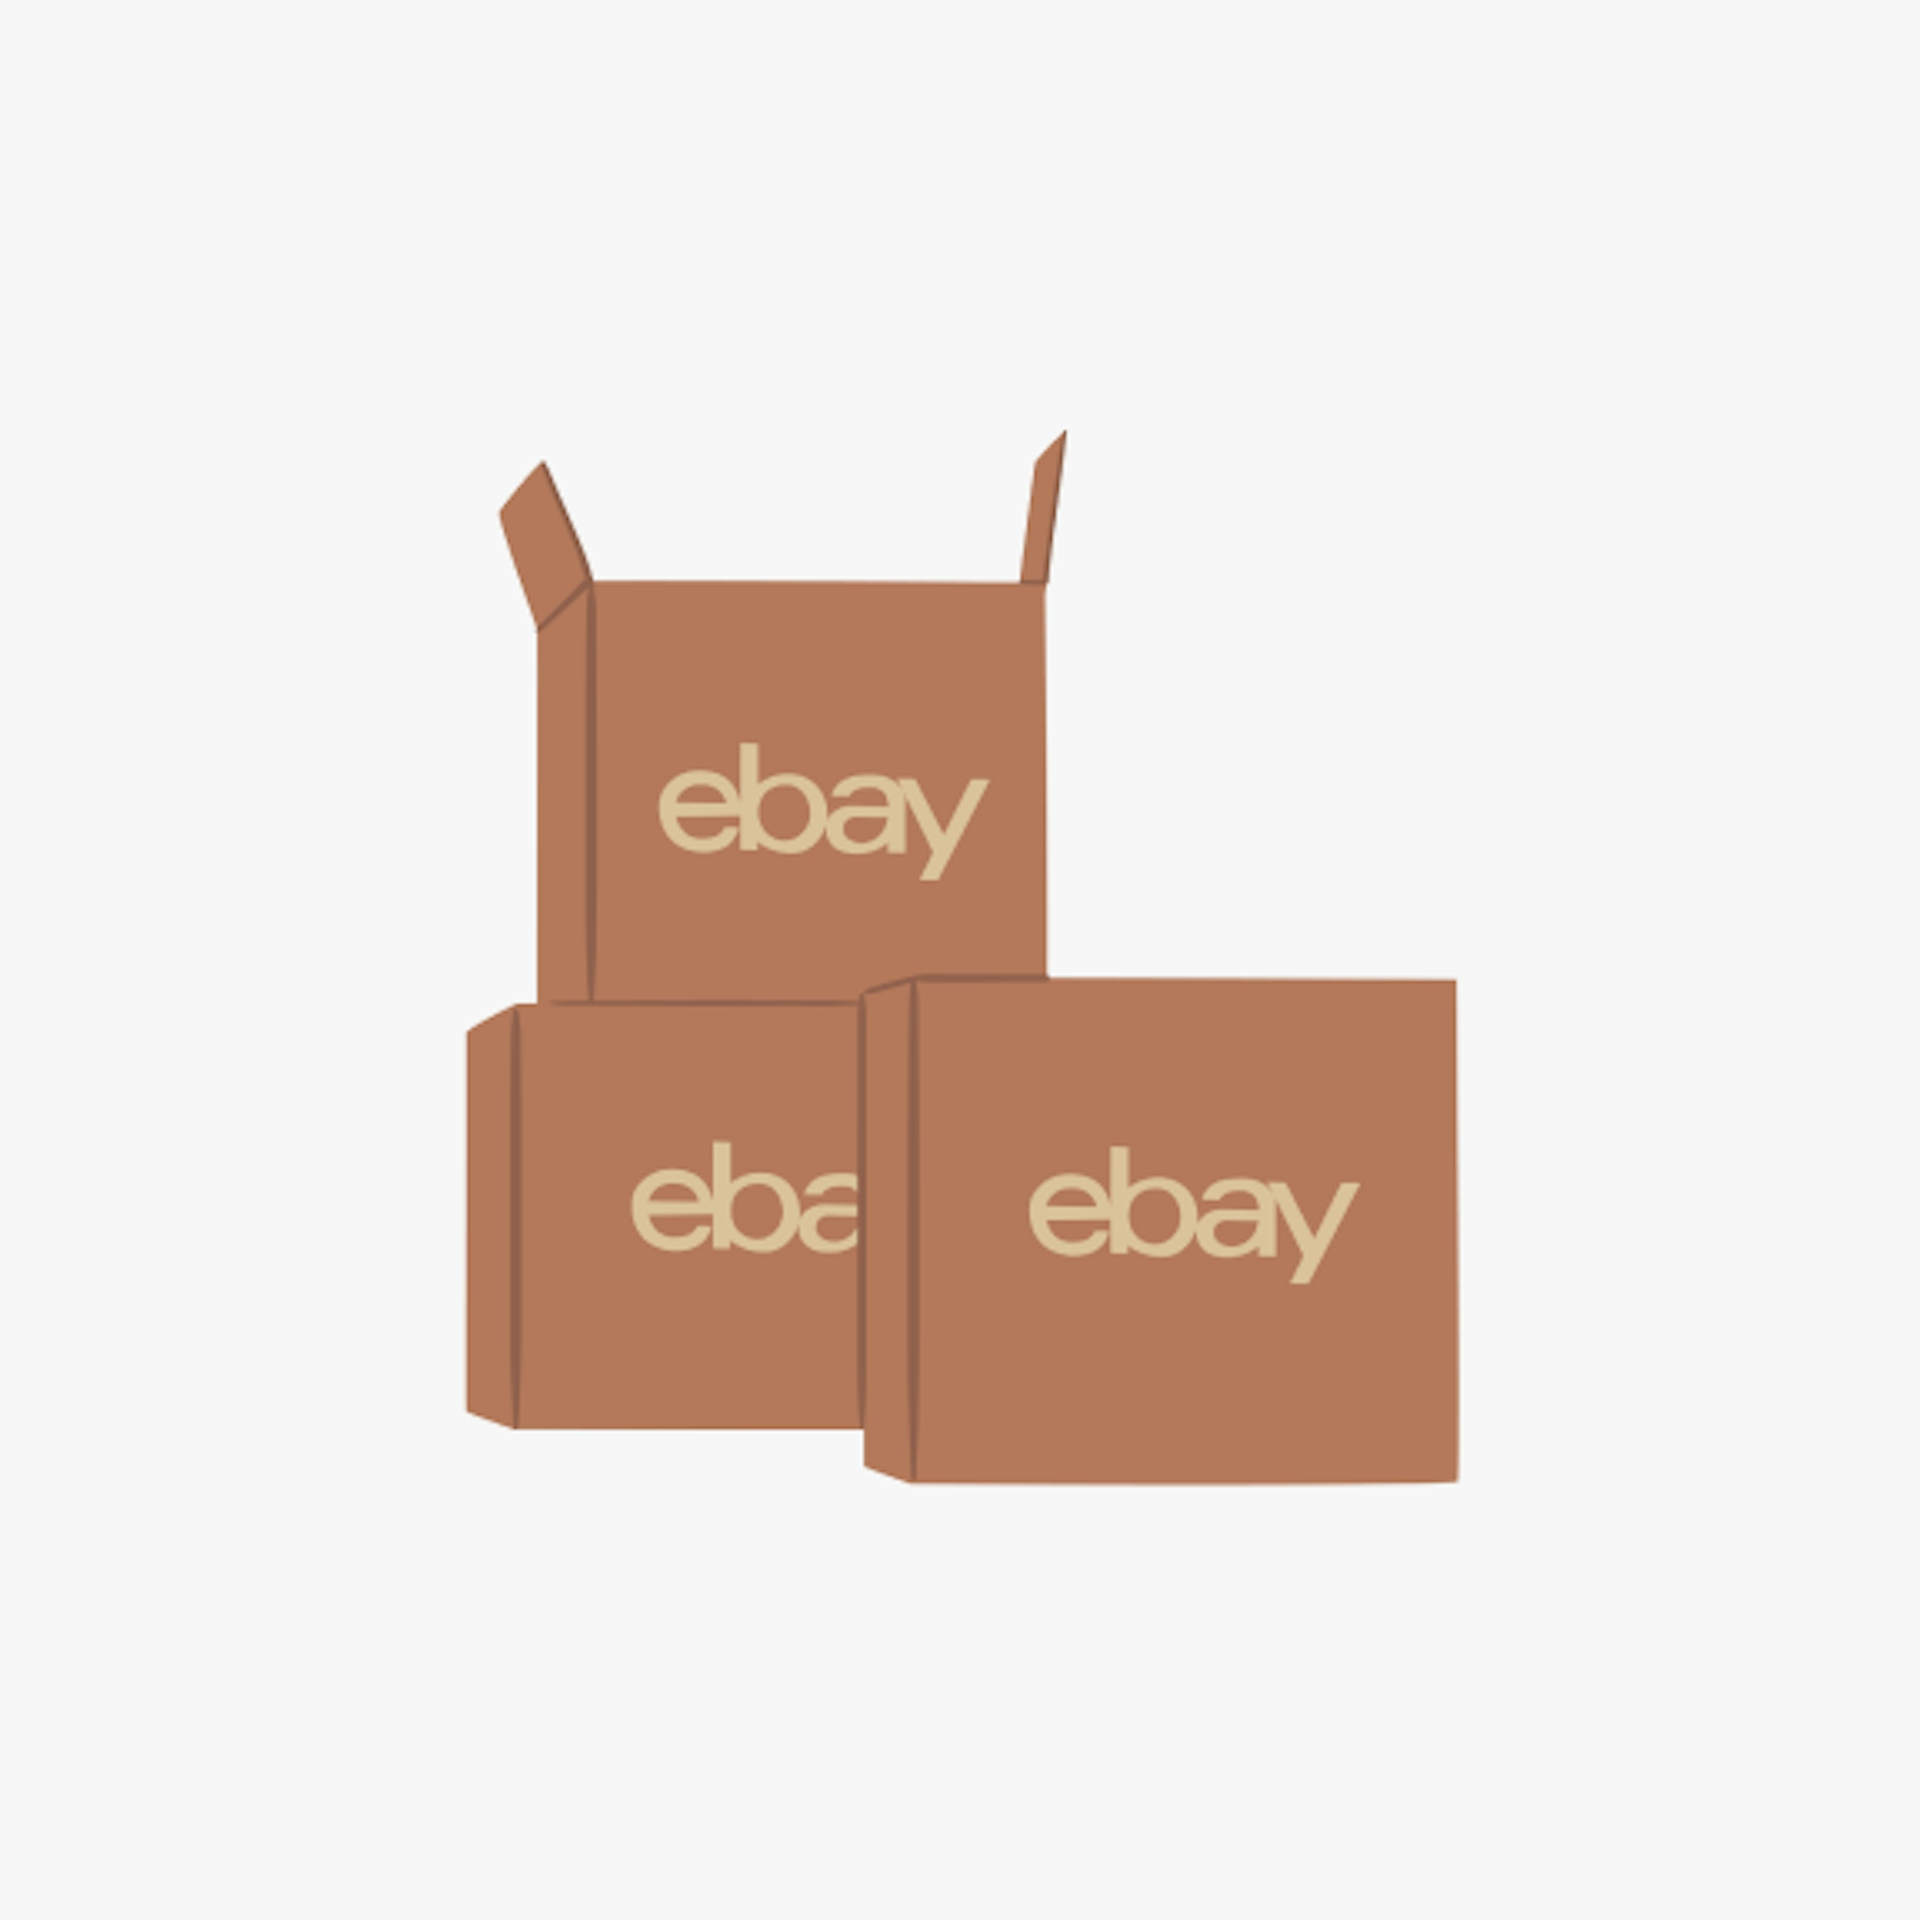 Three brown cardboard boxes with the eBay logo are stacked together. One box is open at the top.